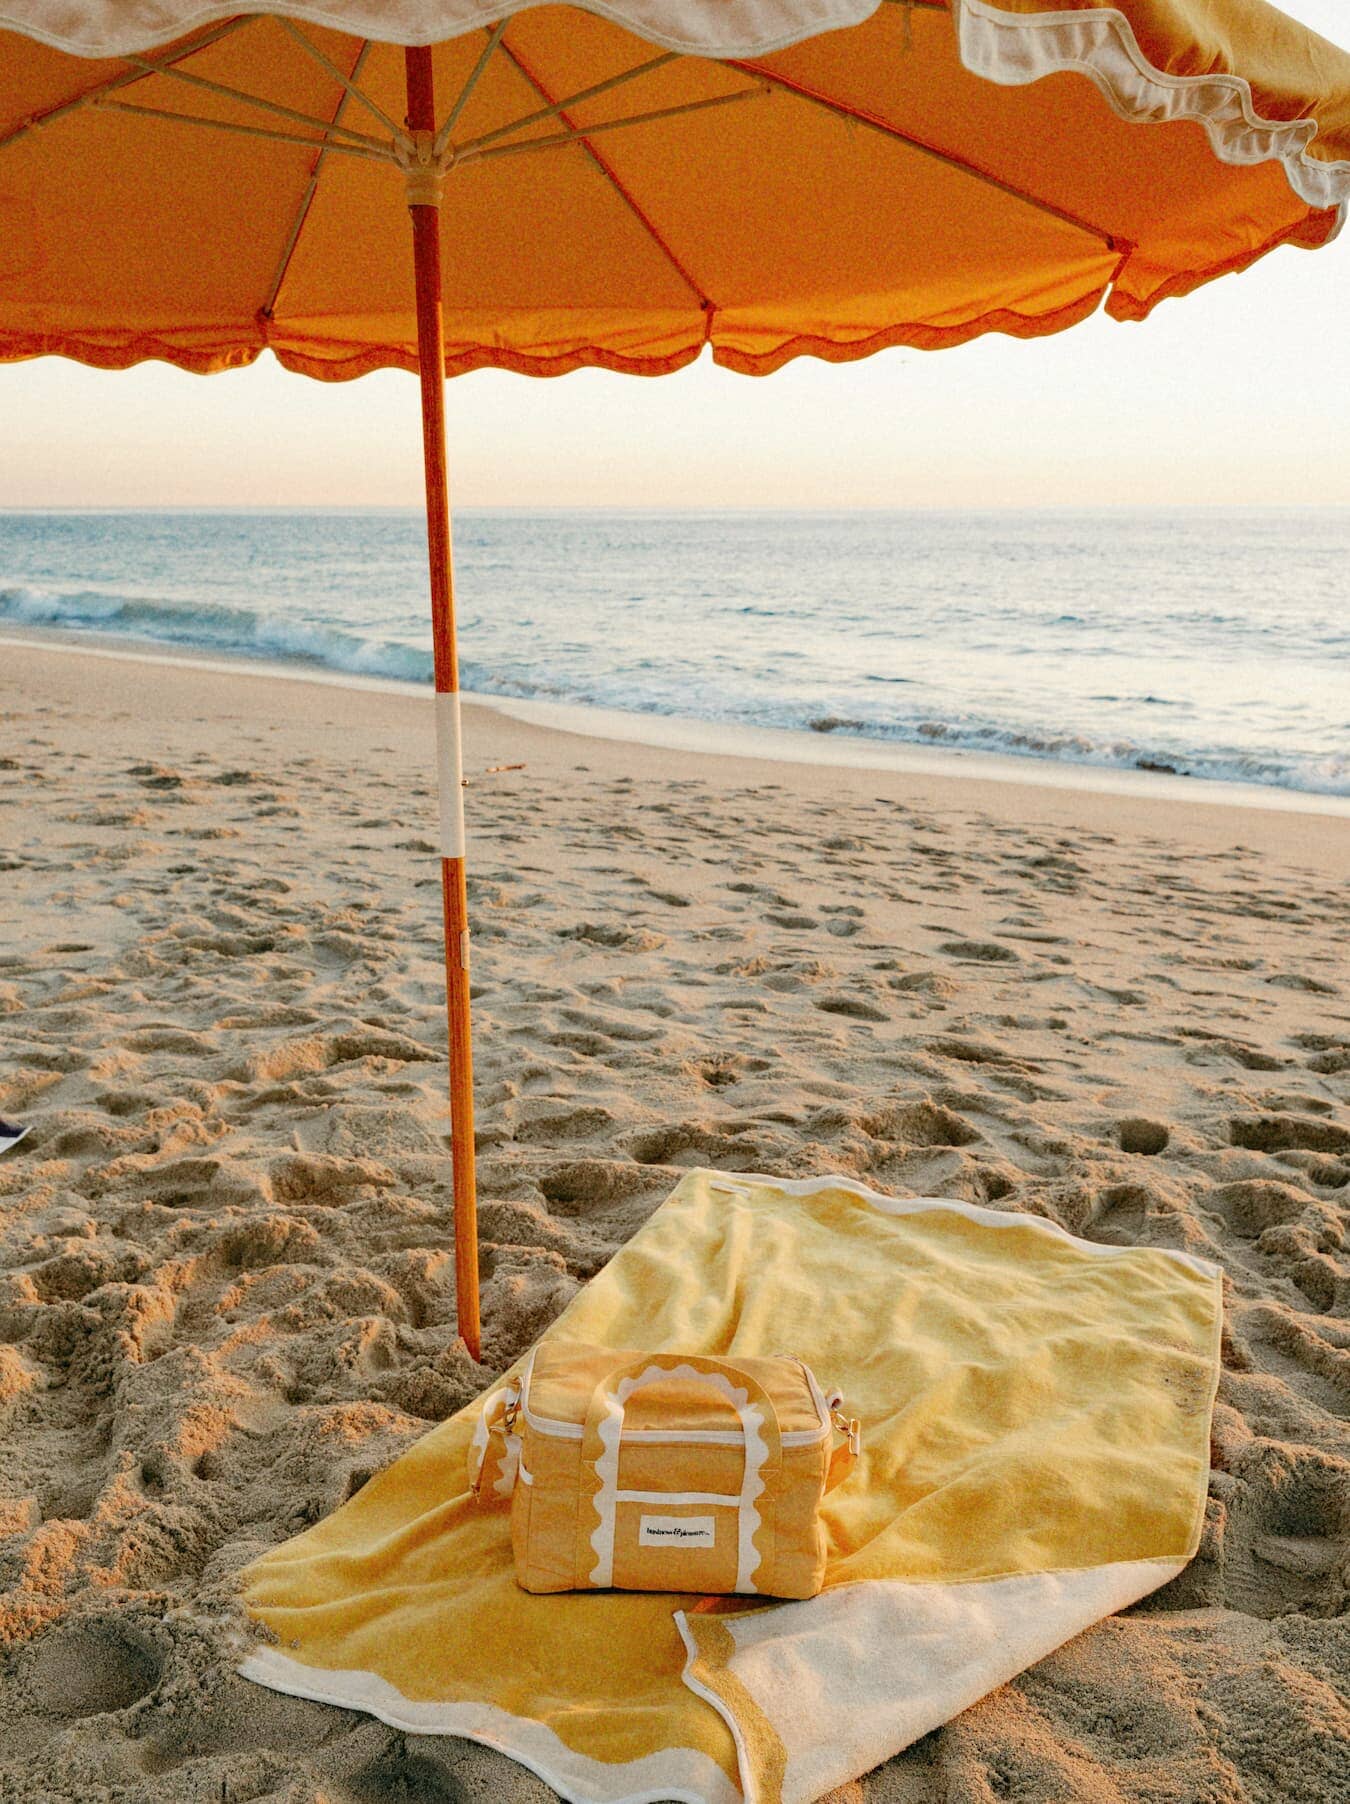 Beach set up with riviera mimosa towel, cooler and umbrella